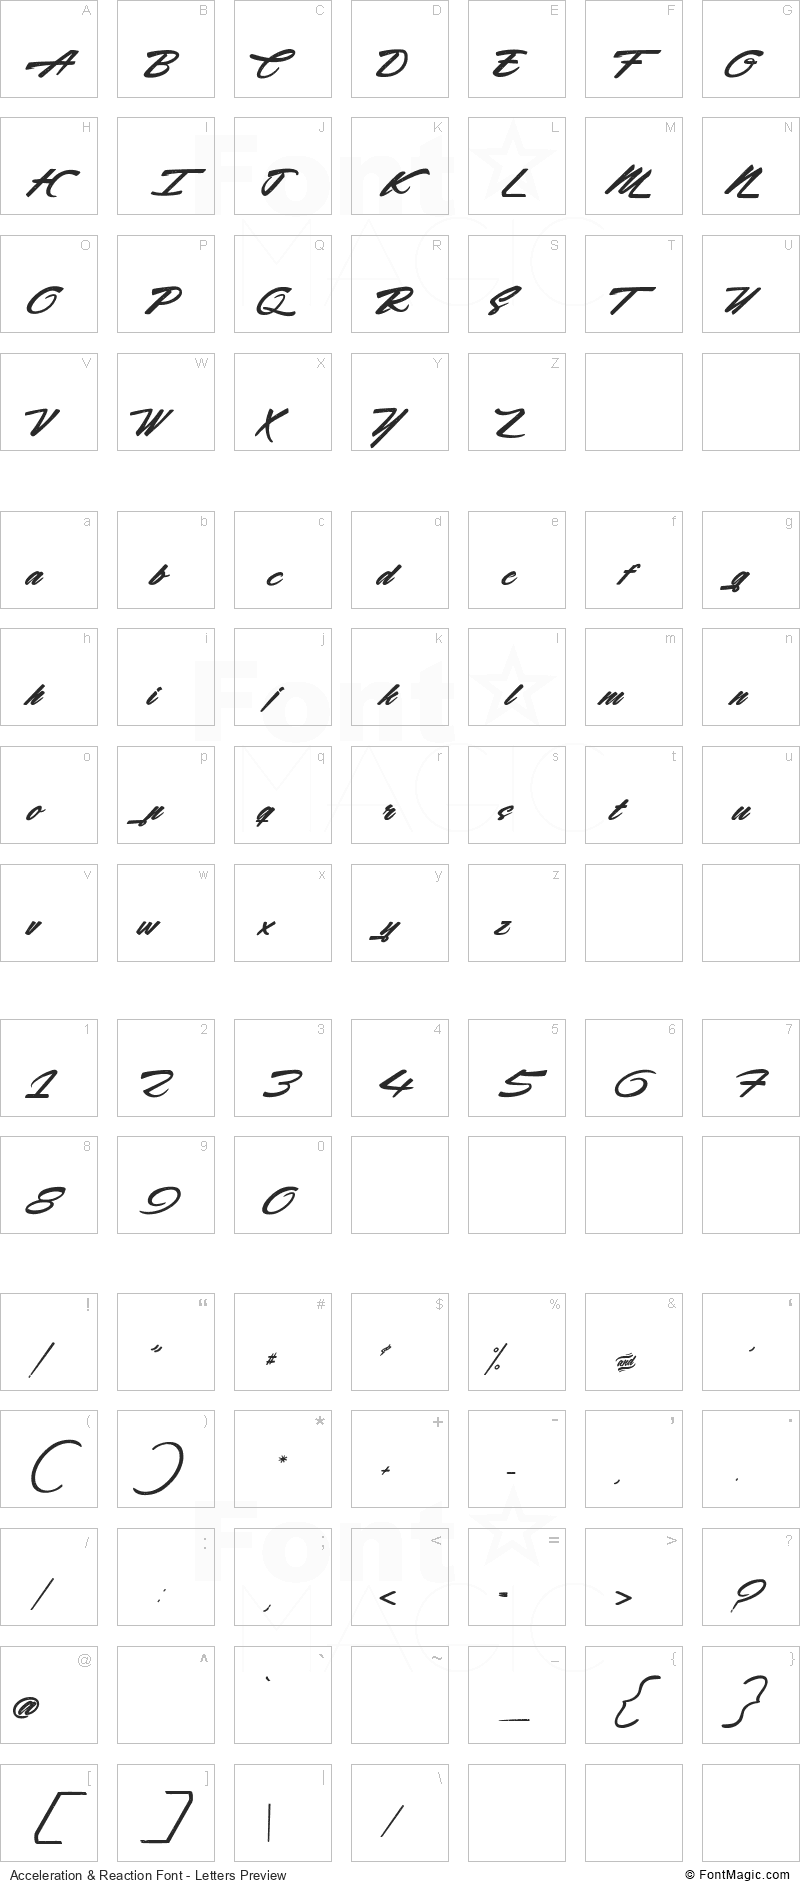 Acceleration & Reaction Font - All Latters Preview Chart